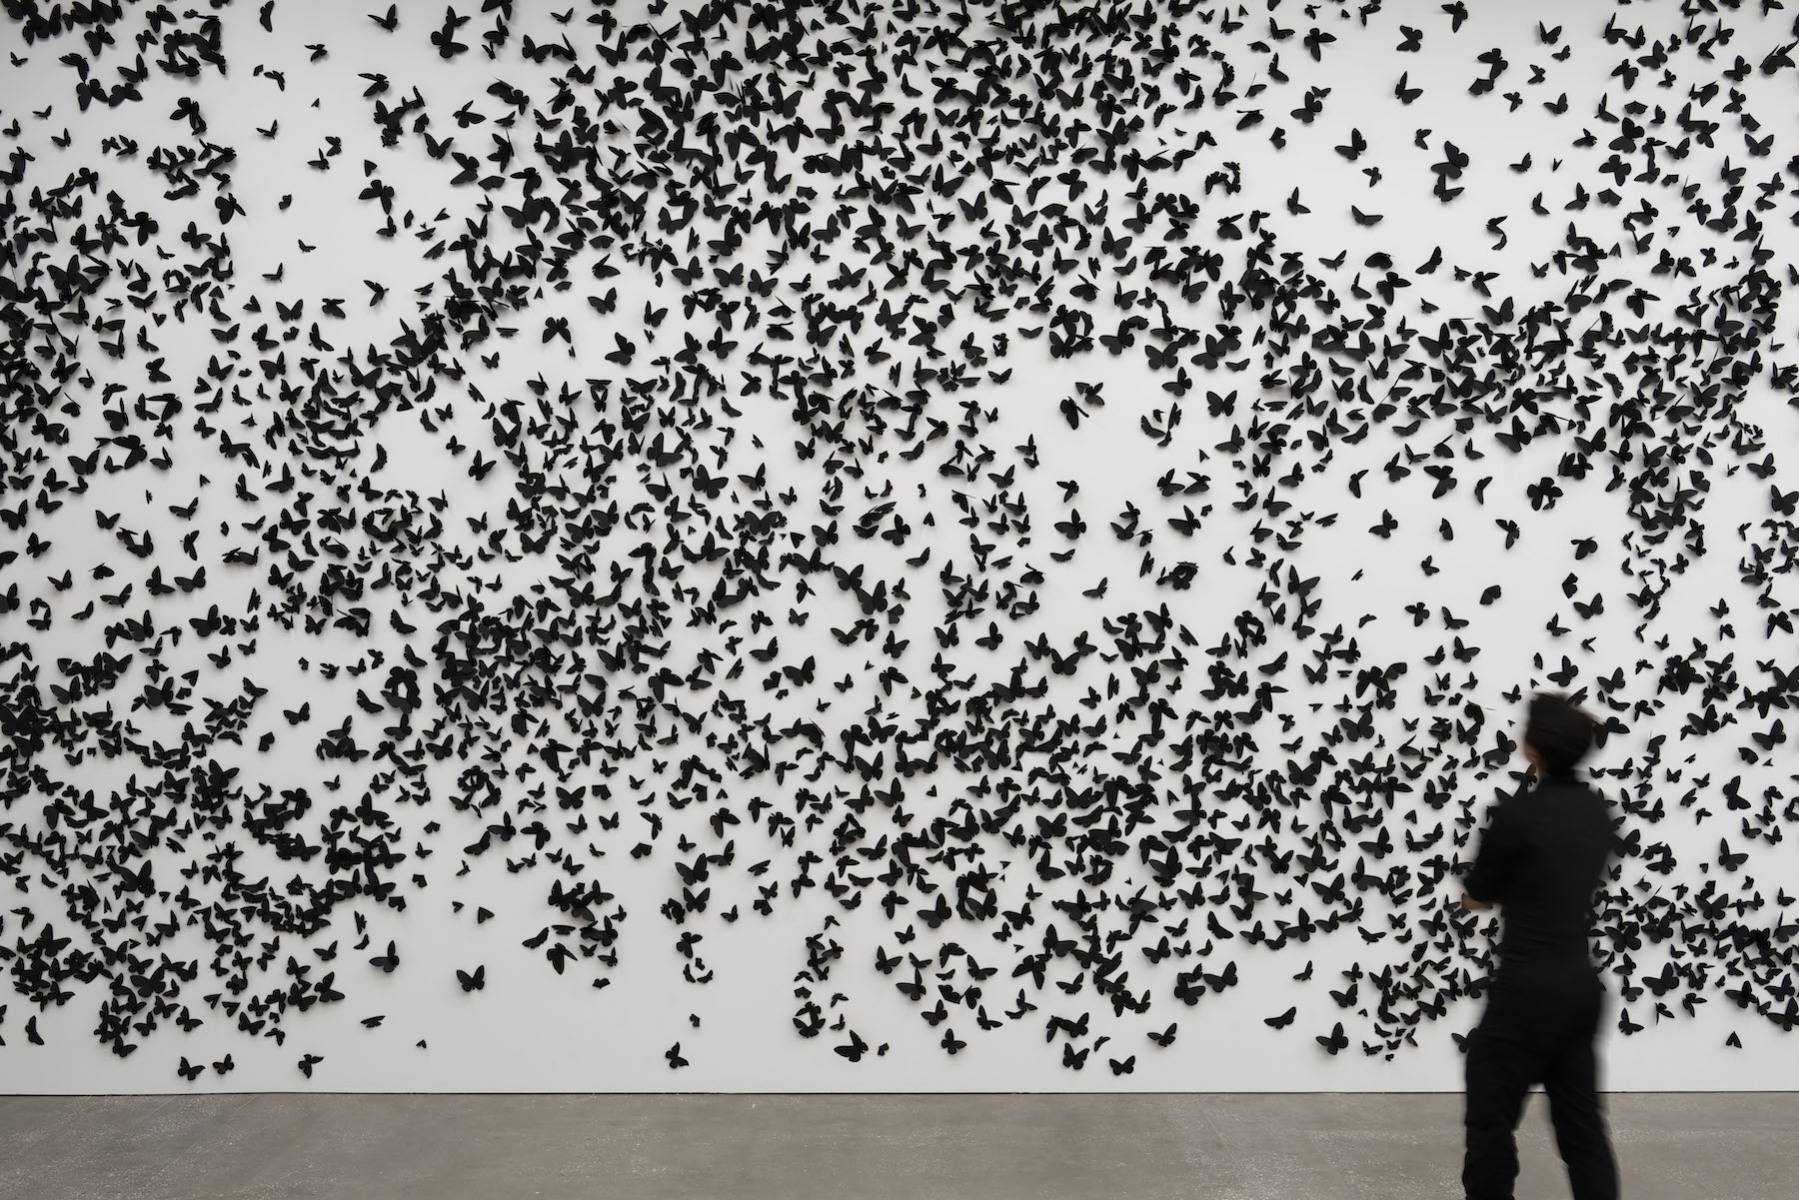 Black paper butterflies fill a white gallery wall, a figure stands in front observing